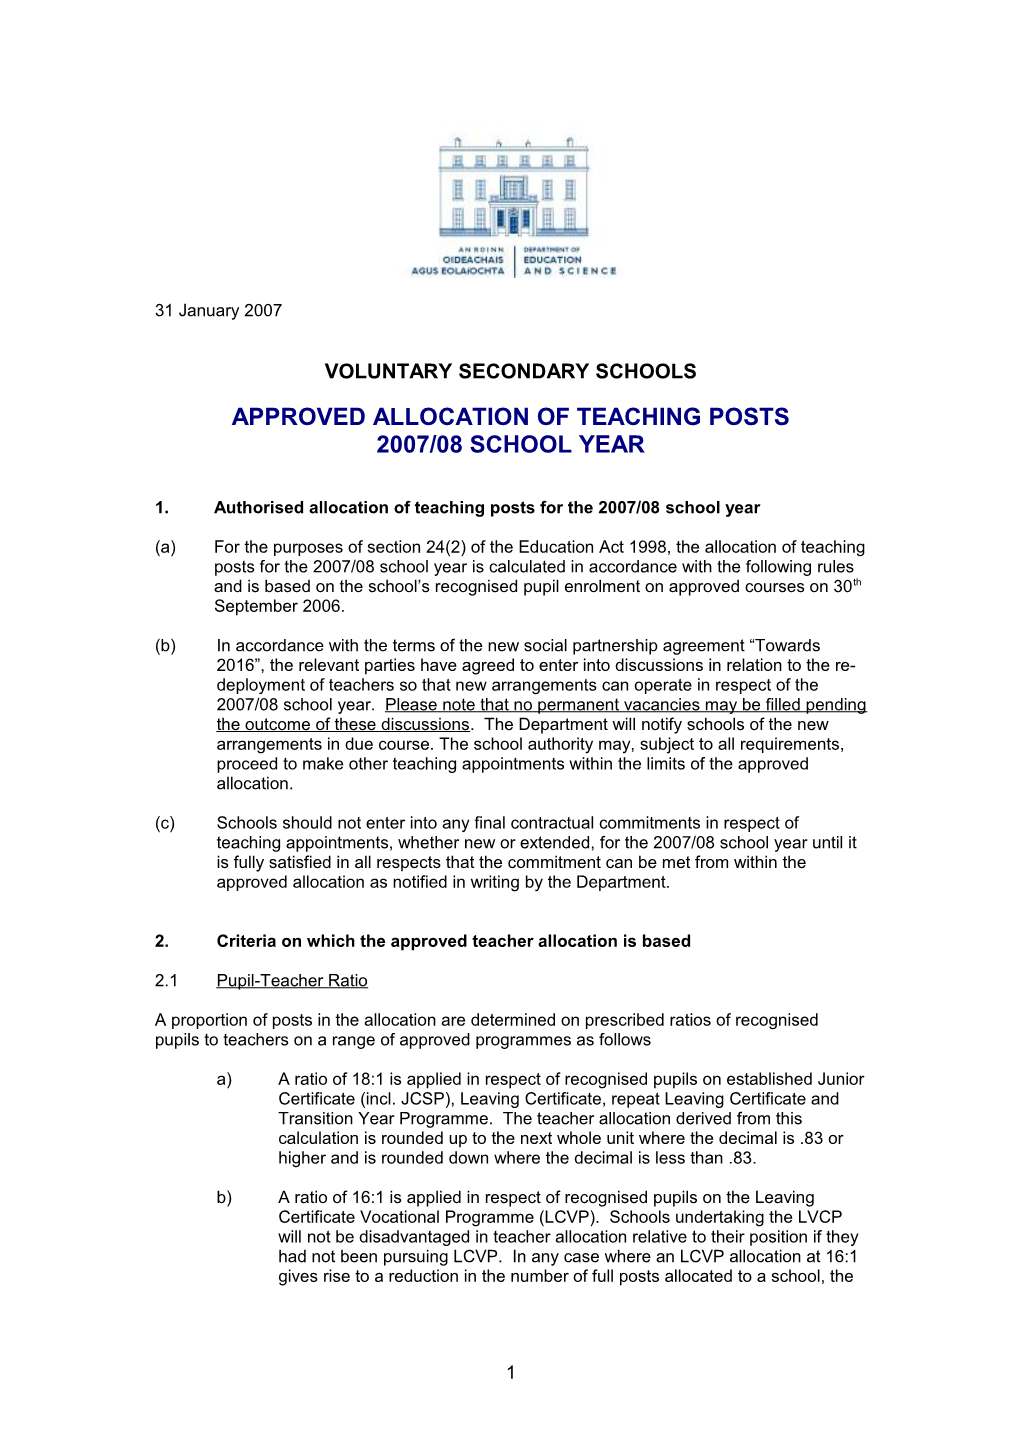 Approved Allocation of Teaching Posts for the 2007/08 School Year - Secondary Schools (File